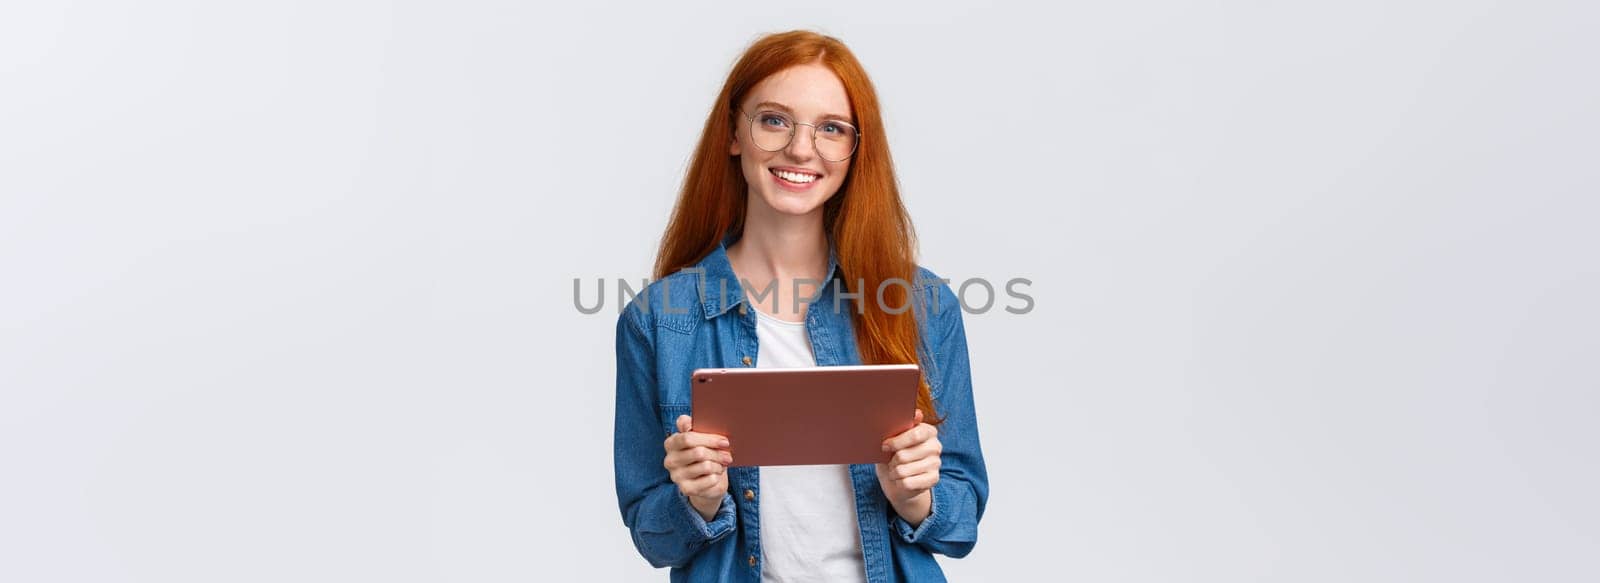 Education, people and teamwork concept. Cheerful pretty redhead millennial female coworker introducing project to team, holding digital tablet, wearing glasses, smiling at camera.